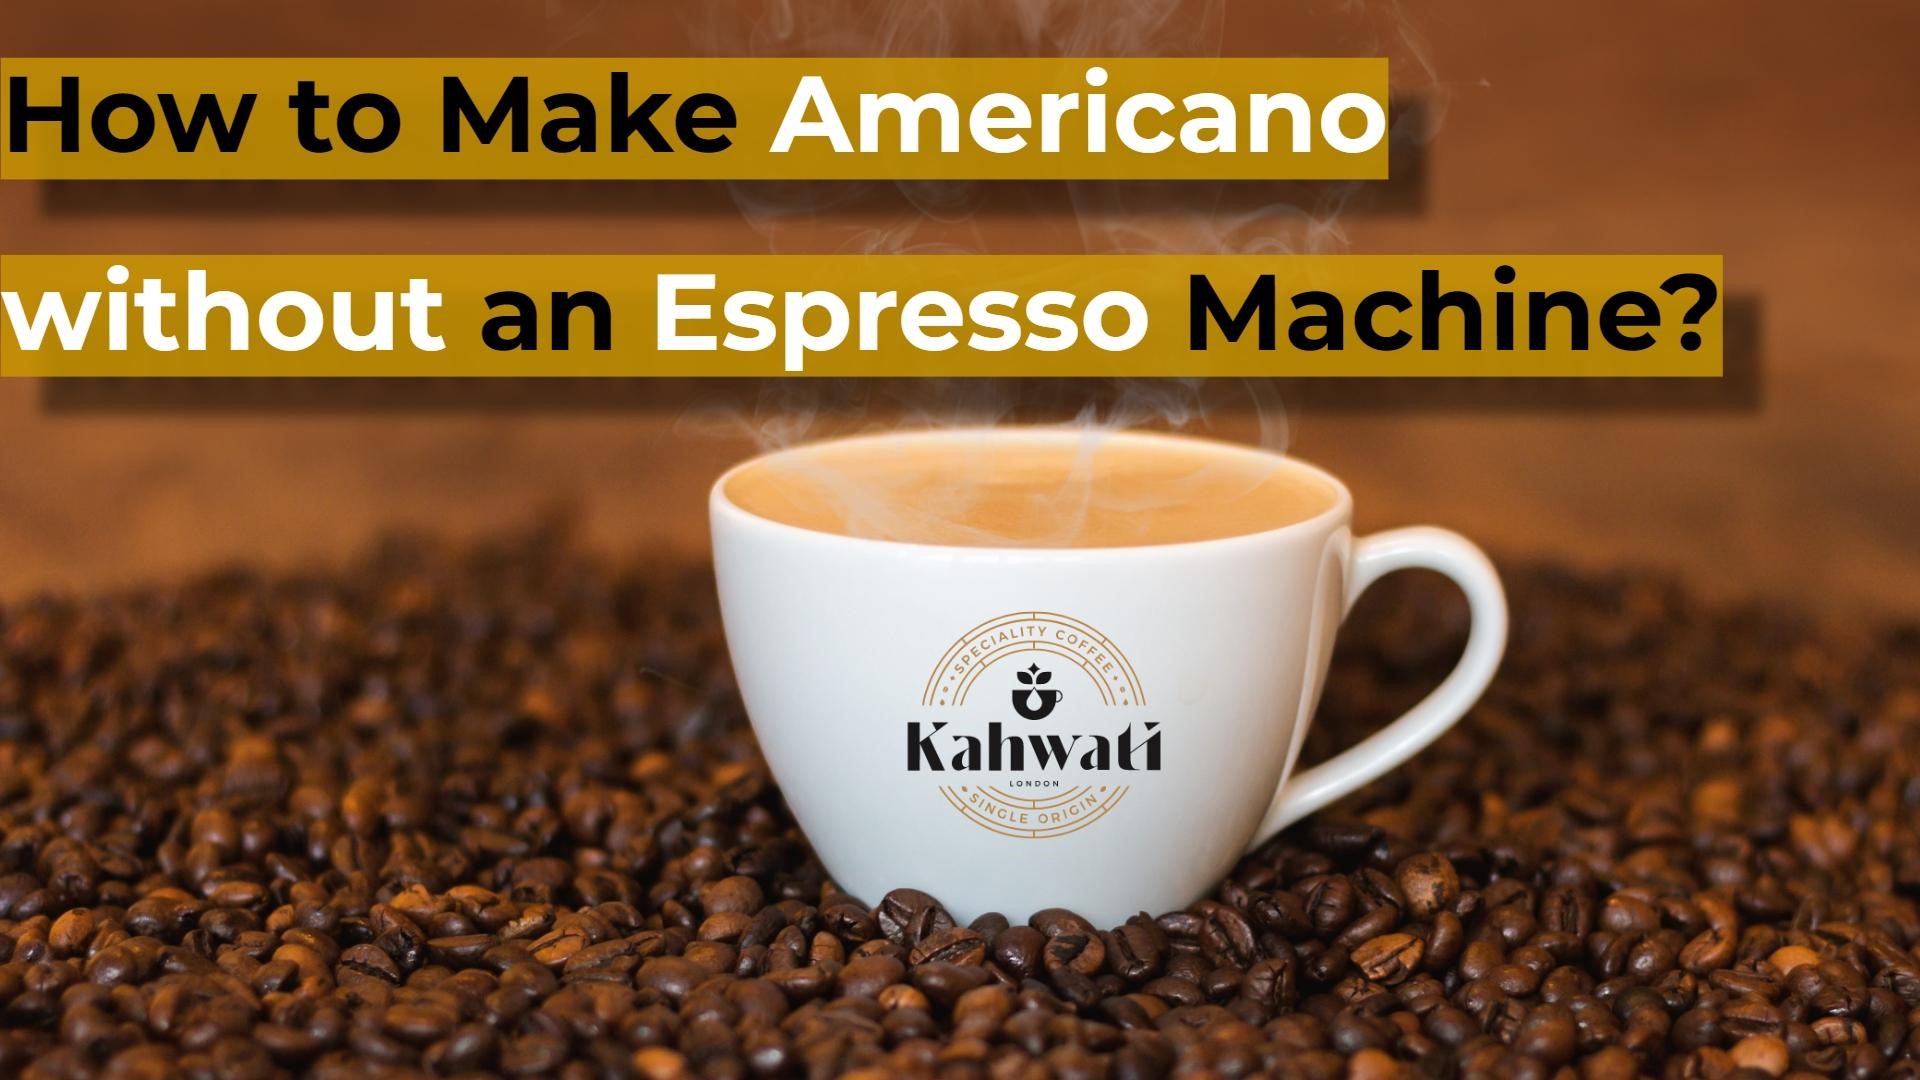 How to Make Americano without an Espresso Machine